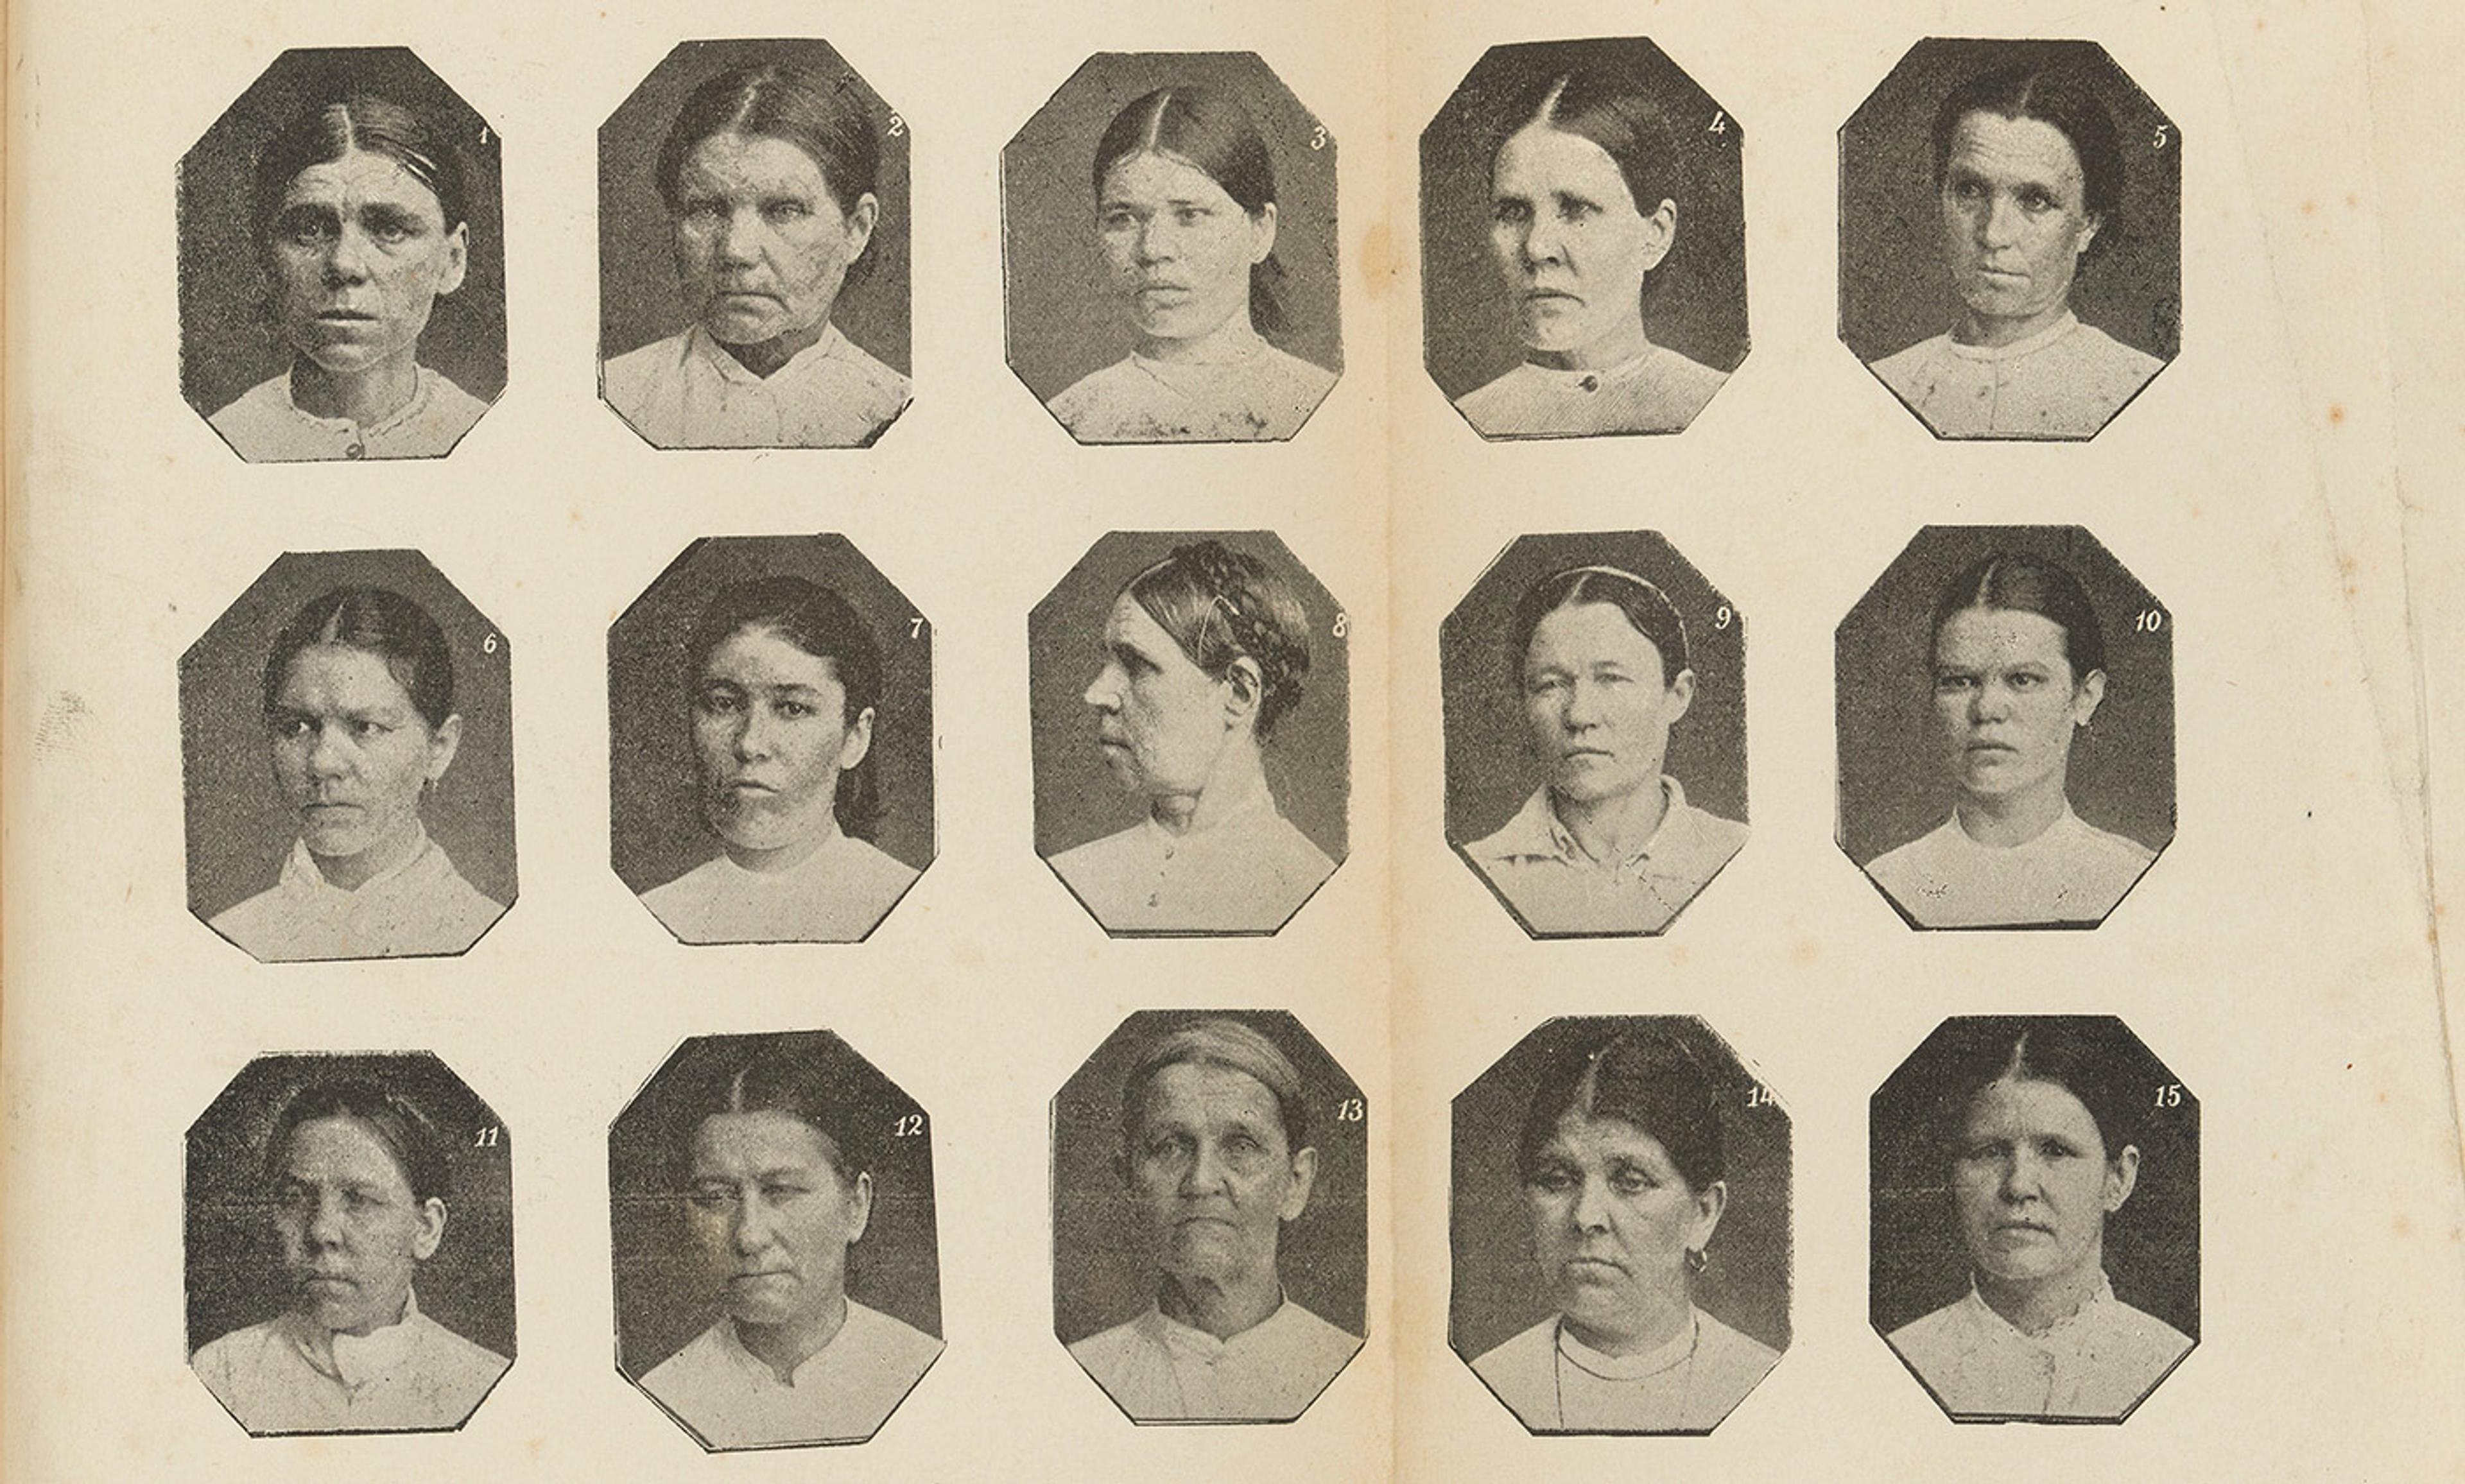 <p>Physiognomies of Russian criminals from <em>The Delinquent Woman</em> (1893) by Cesare Lombroso. <em>Courtesy the Wellcome Collection</em></p>